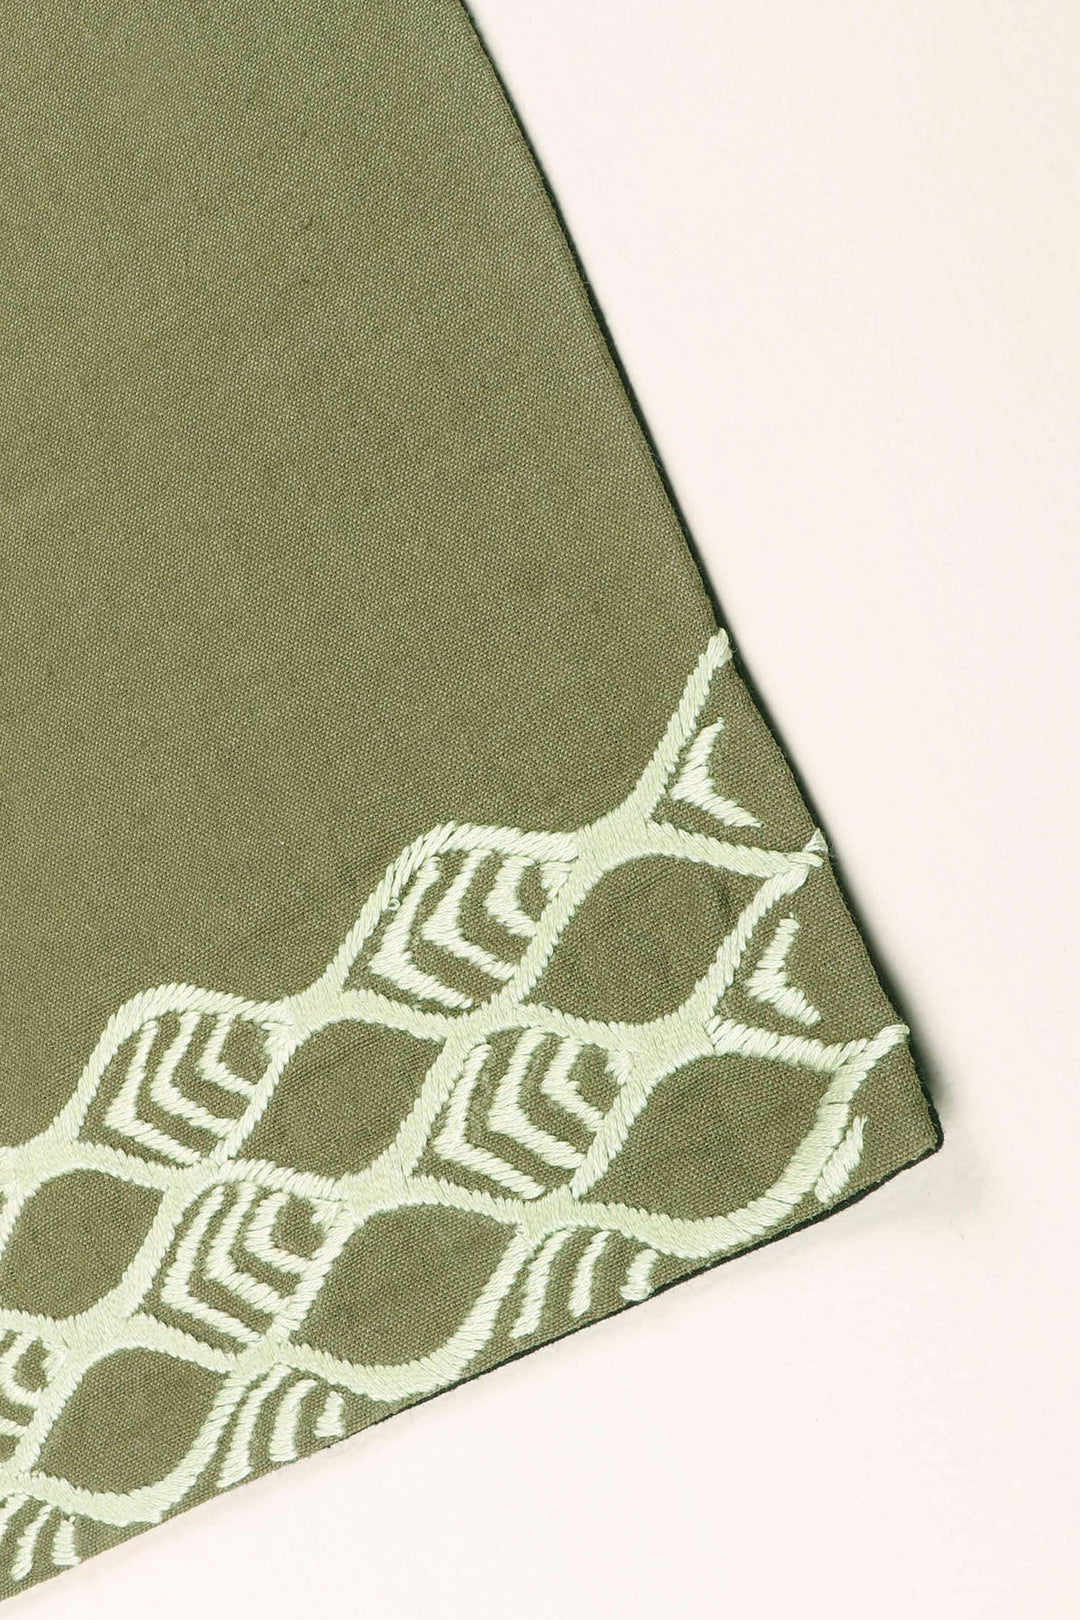 Embroidered Table Mats - Set of 6 | Elias Handwoven Table Mats - Set Of 6 Pcs - Olive Green & Brown